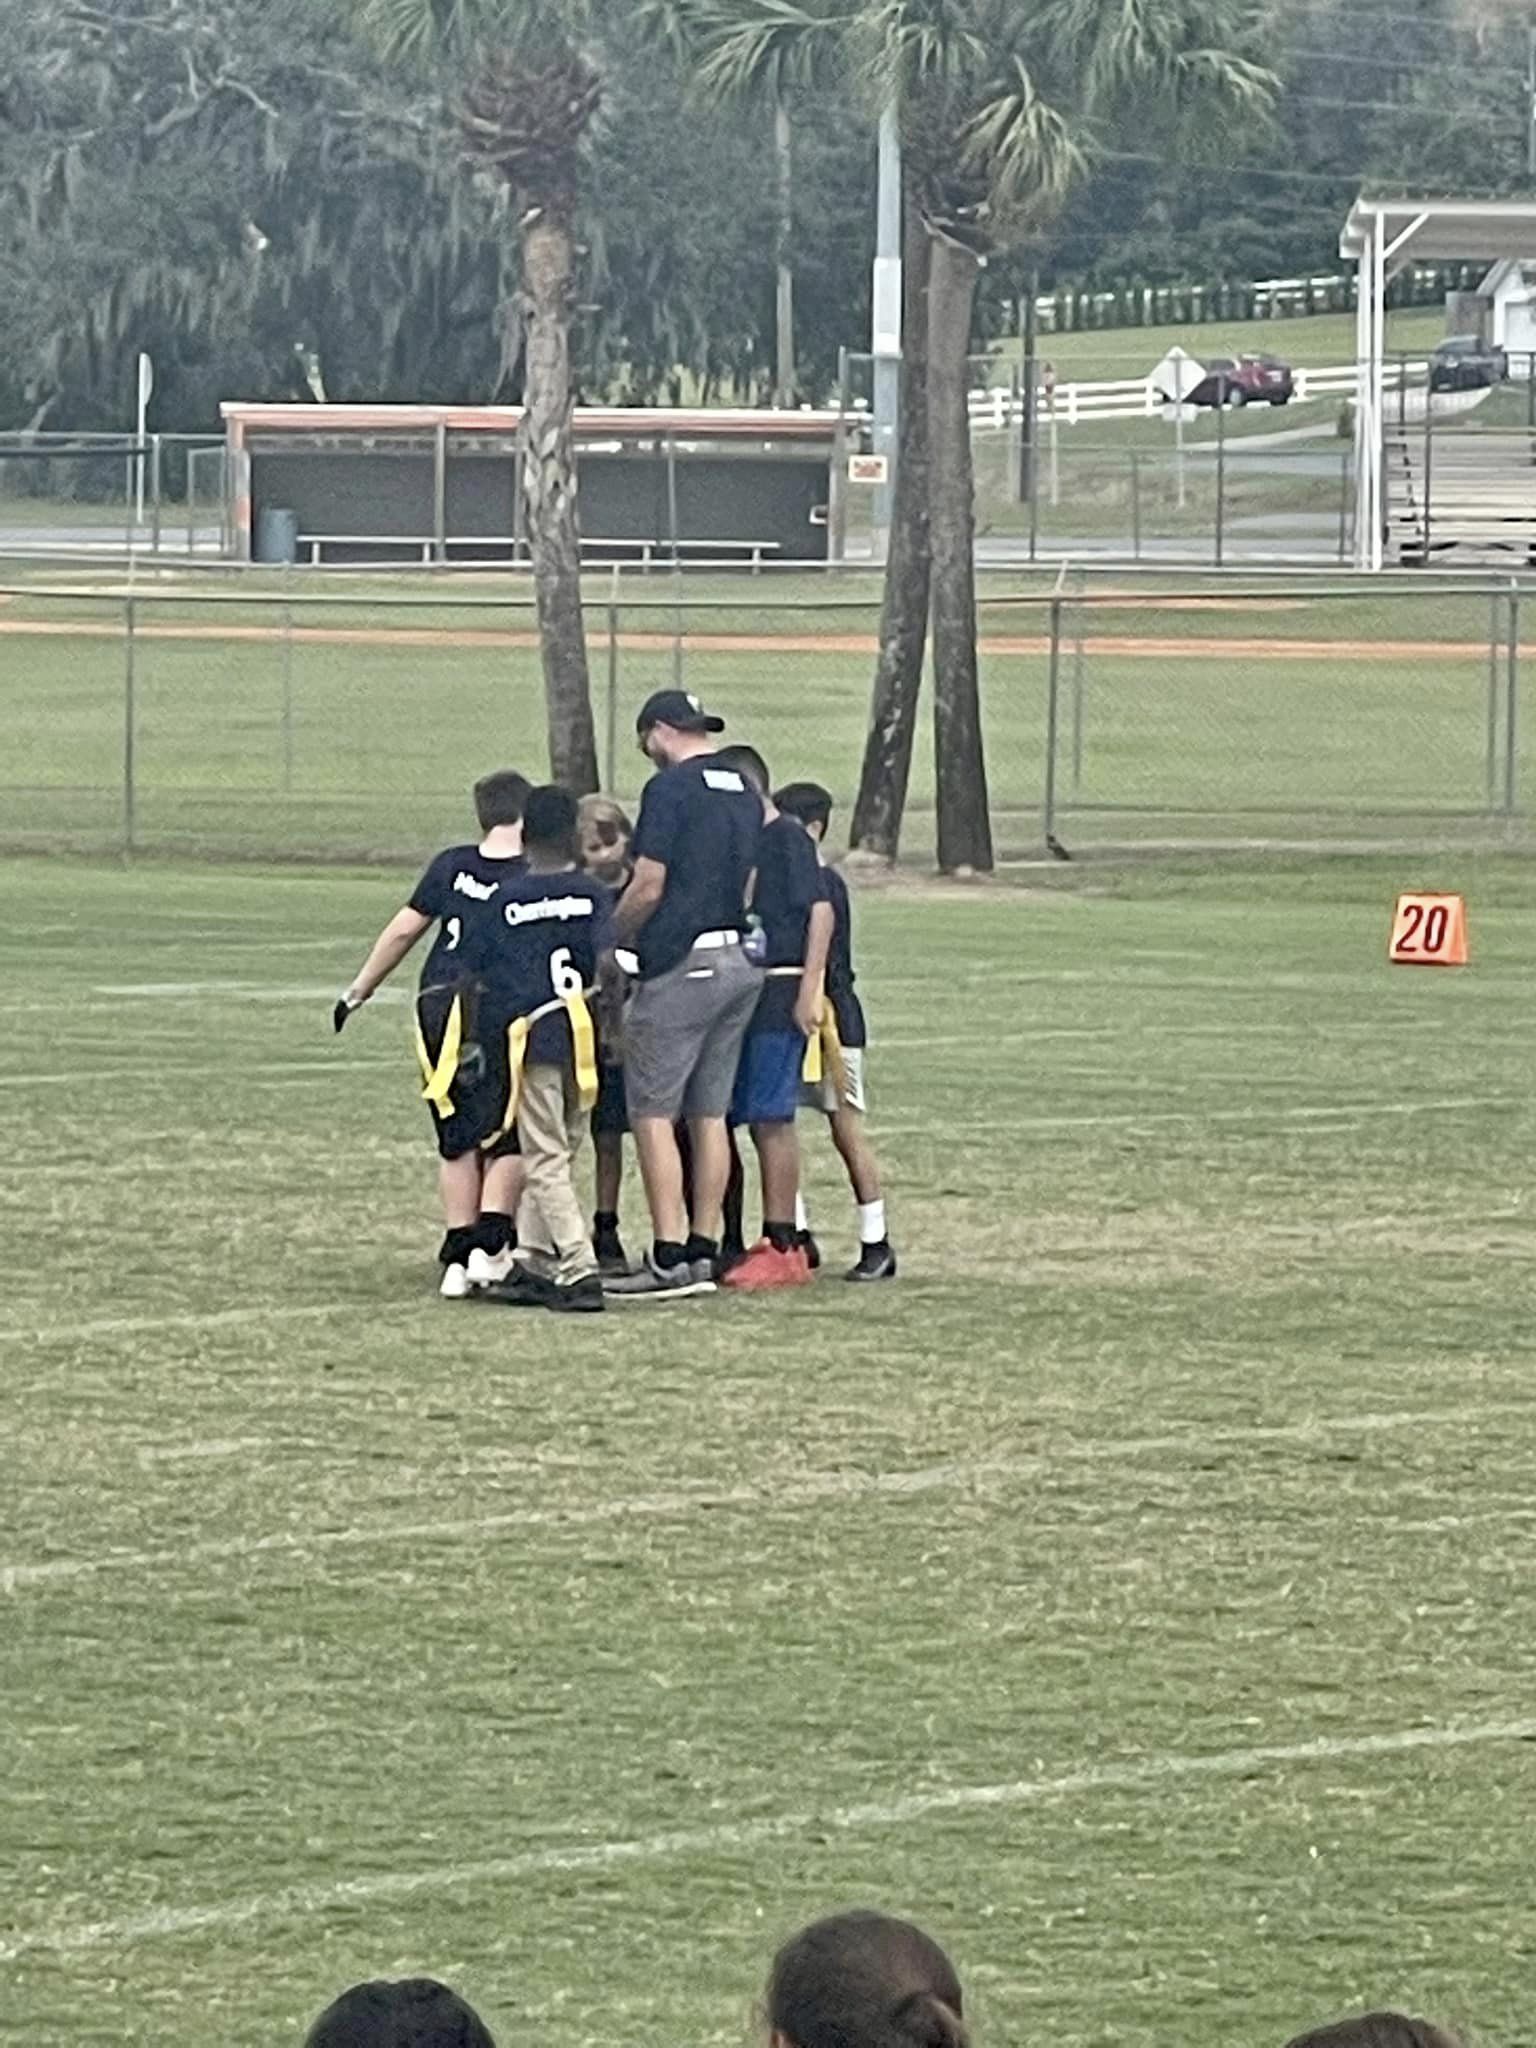 Players huddled with Coach Havens.